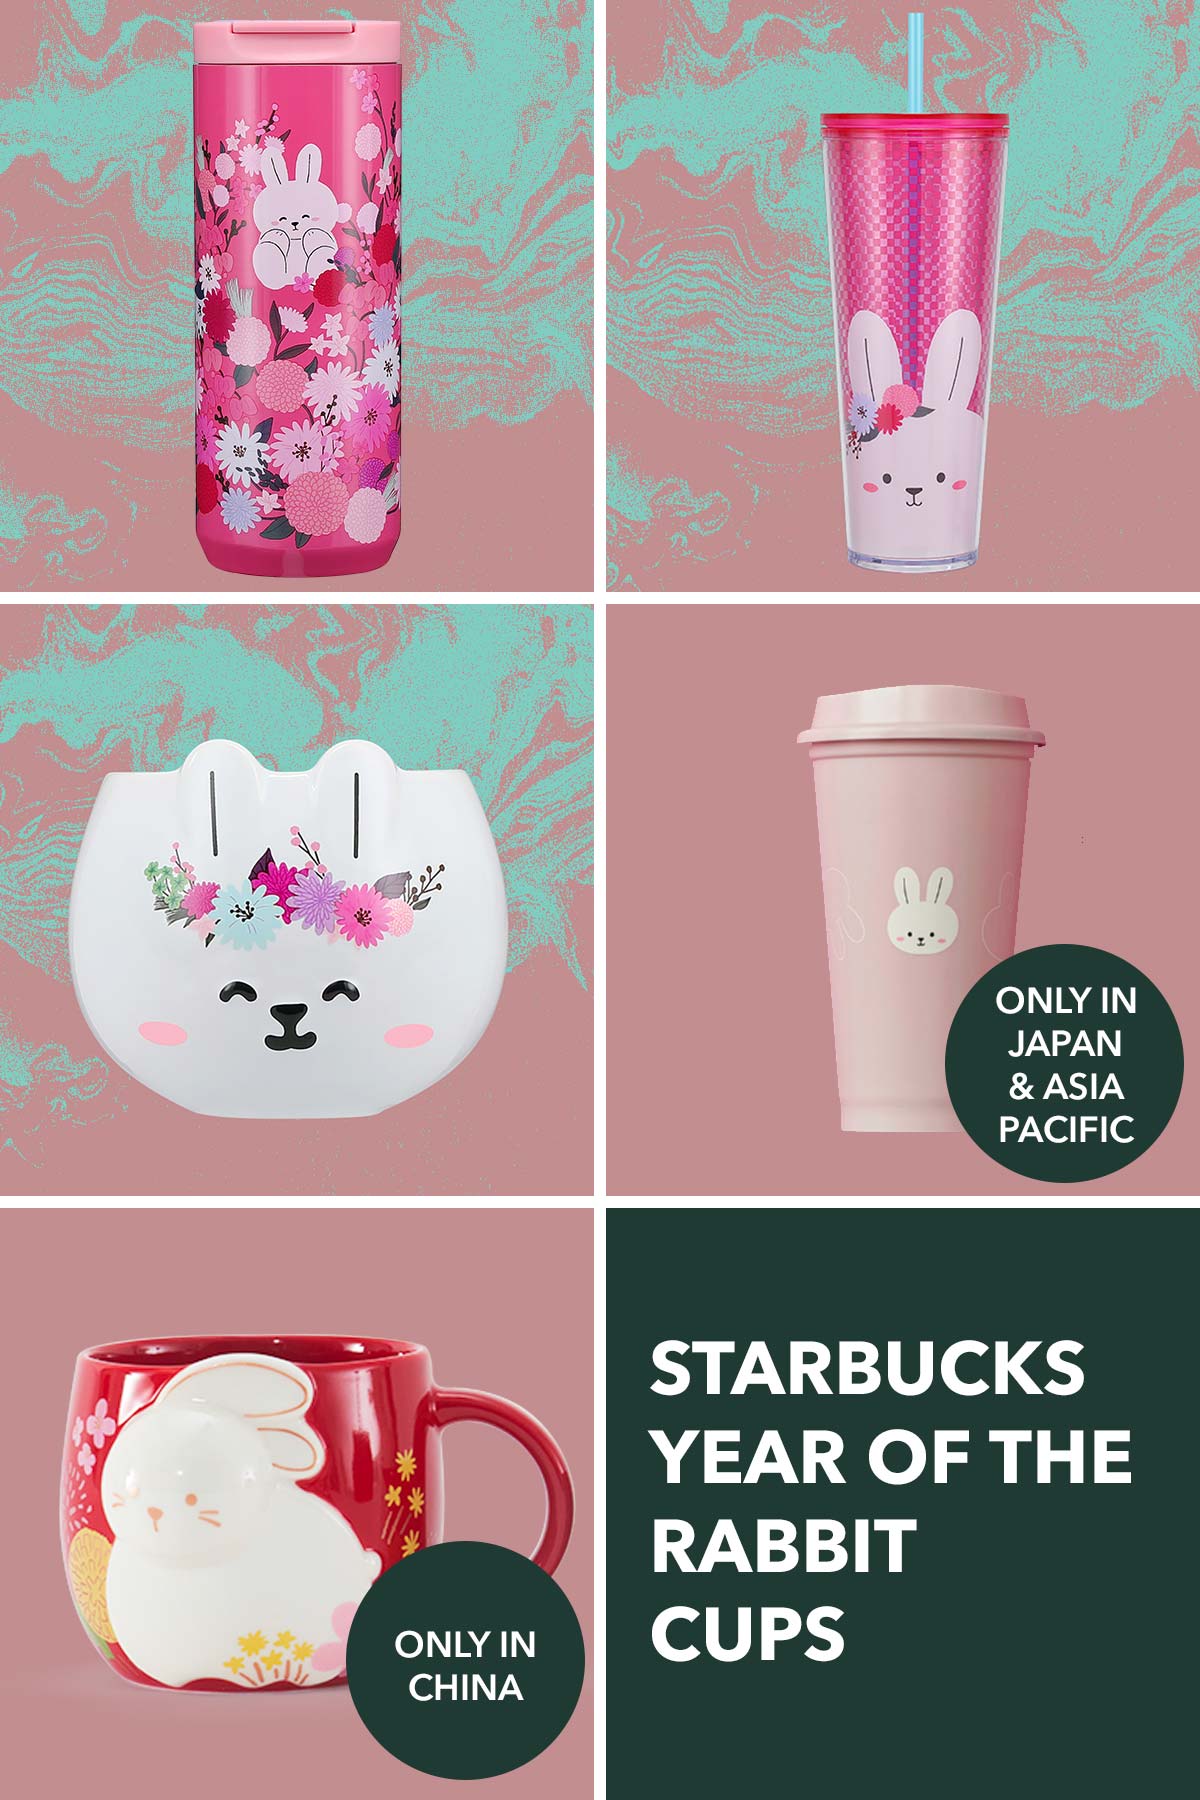 Five Starbucks Year of the Rabbit cups.